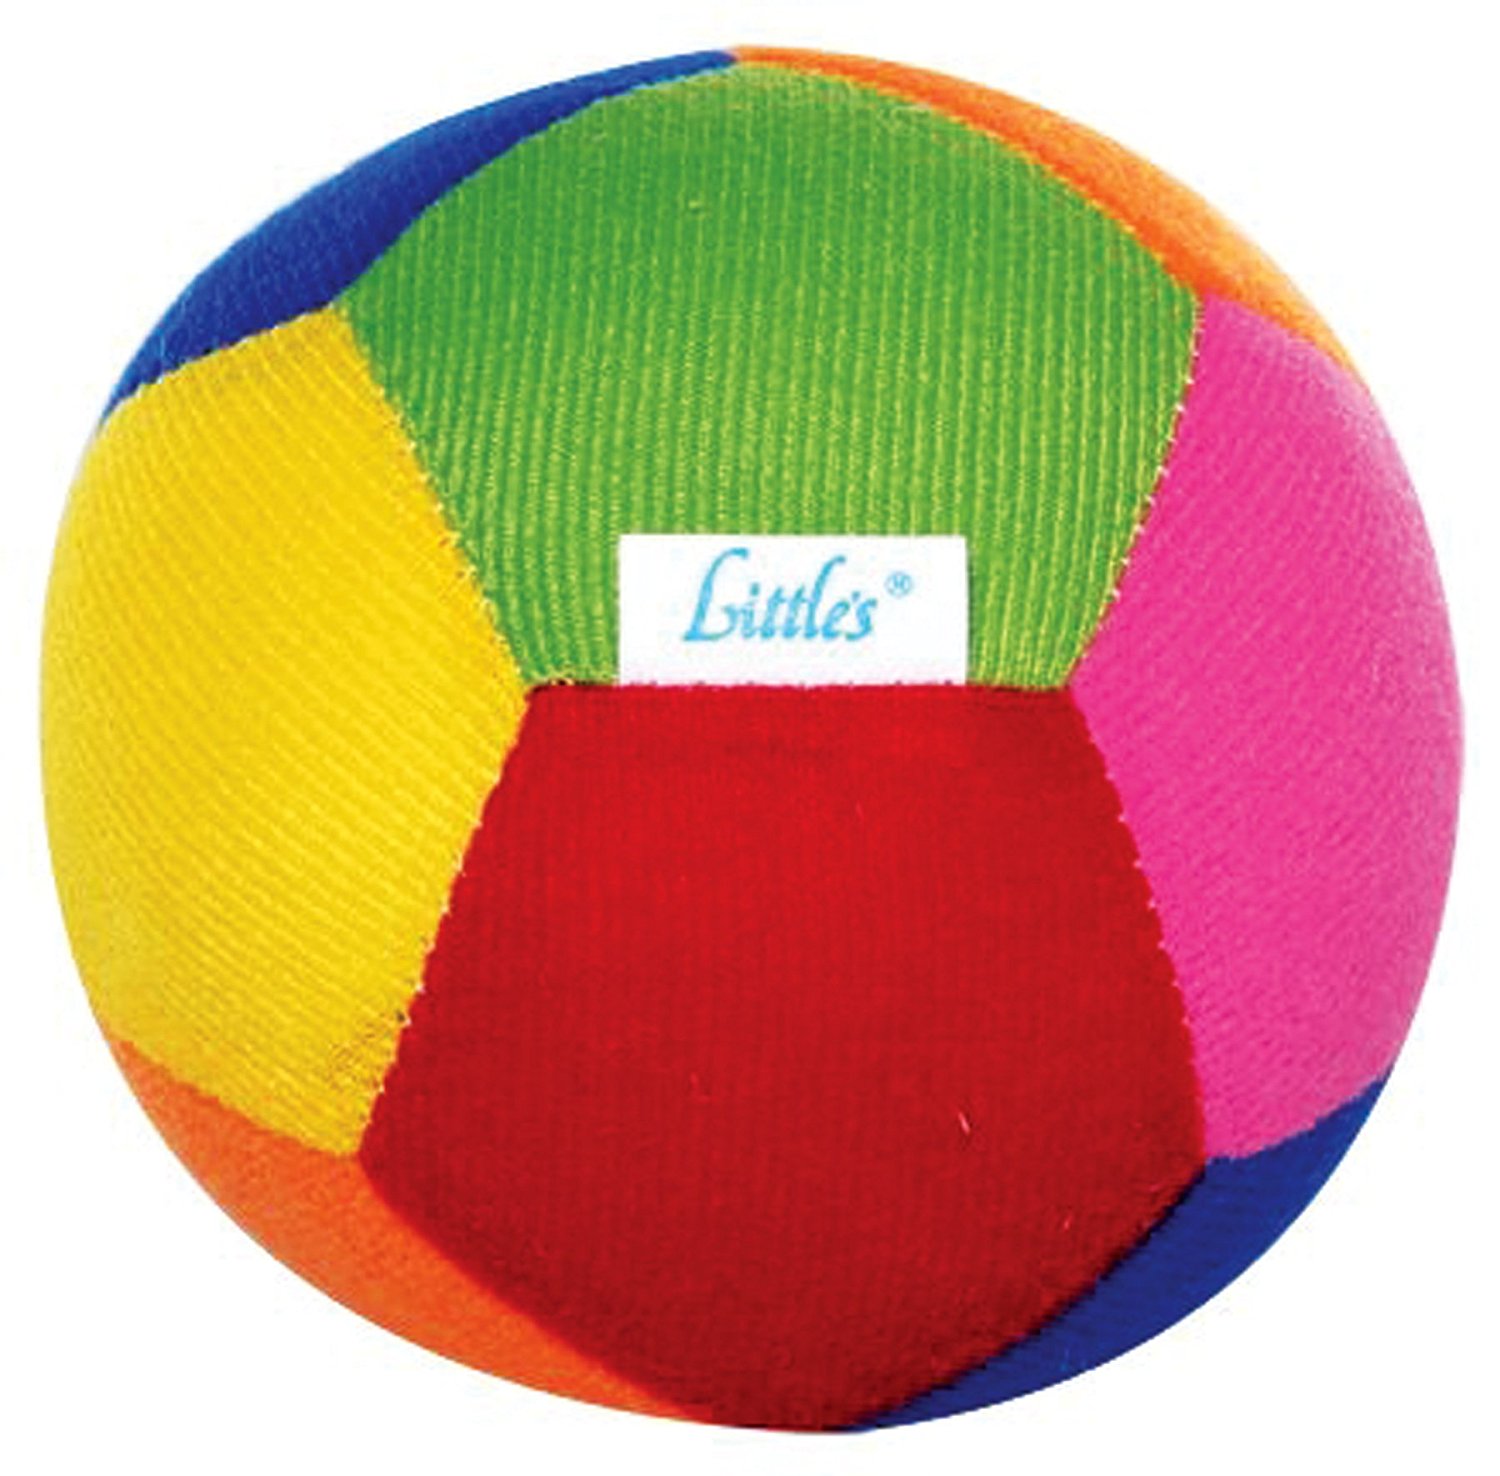 Buy Little's Baby Ball (Multicolour) Online at Low Prices in India ...